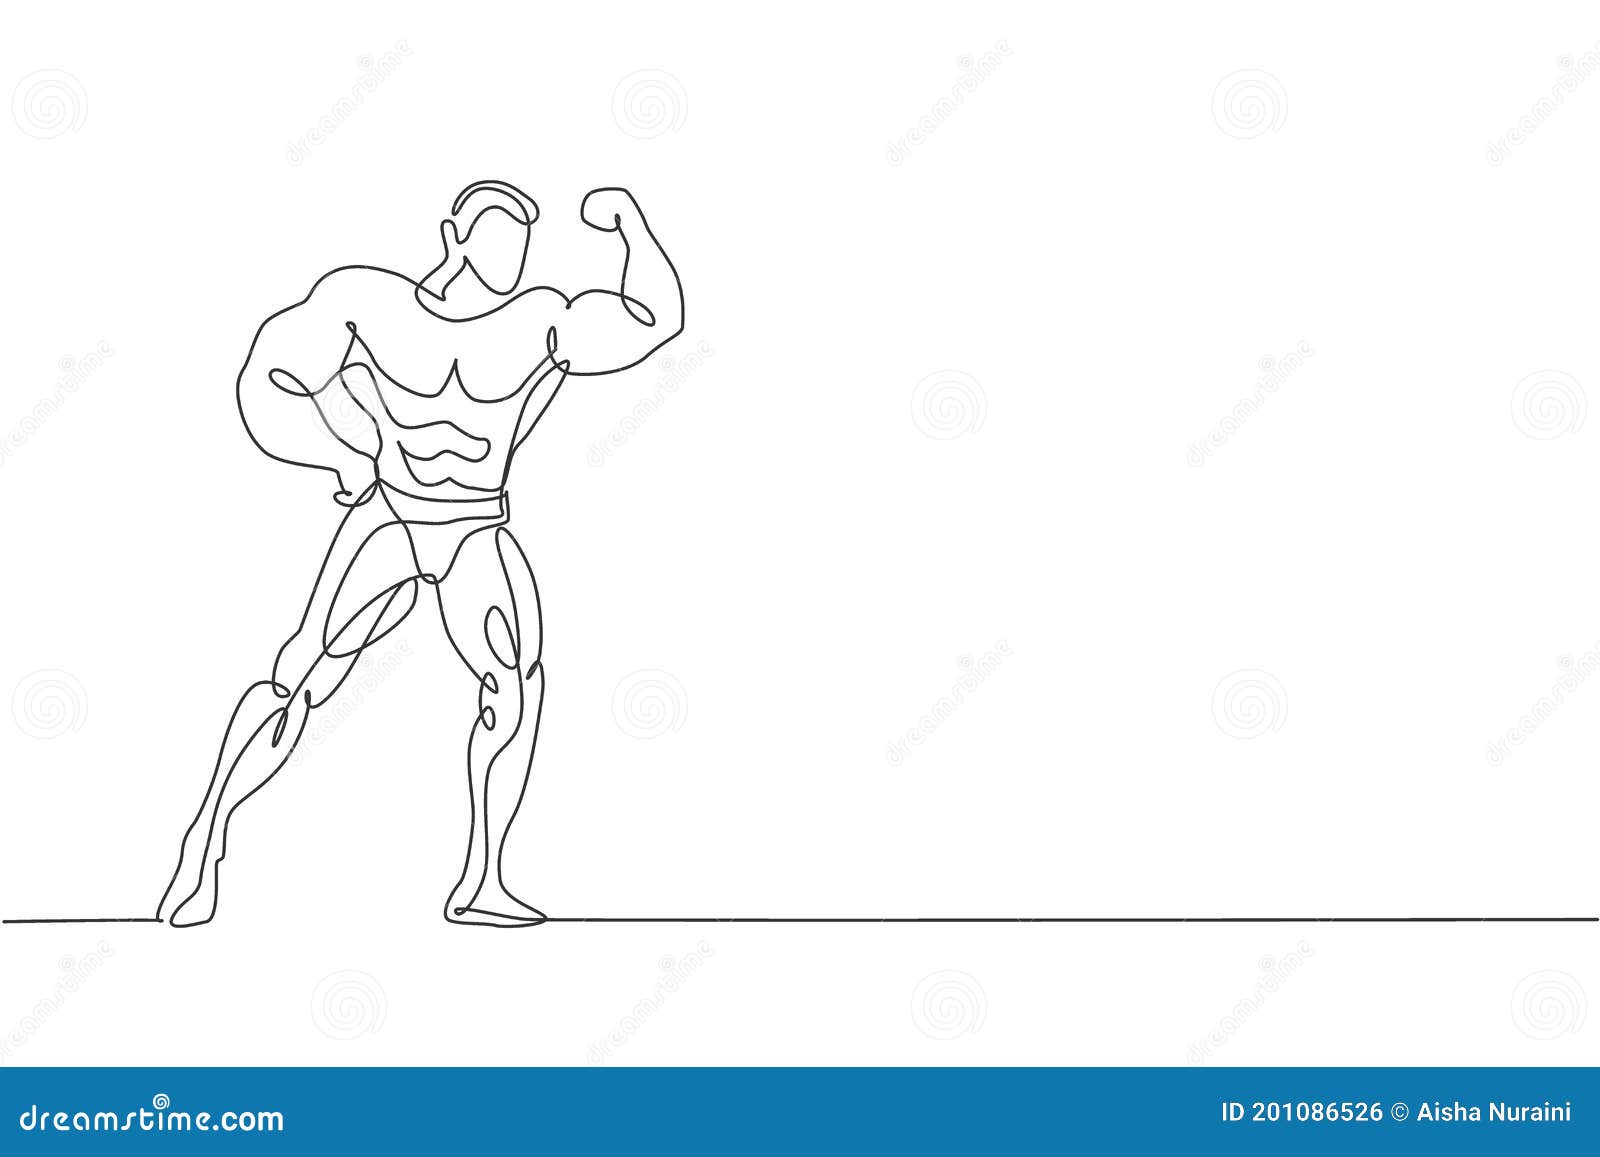 Monochrome sketch of dumbbell for training in gym Vector Image